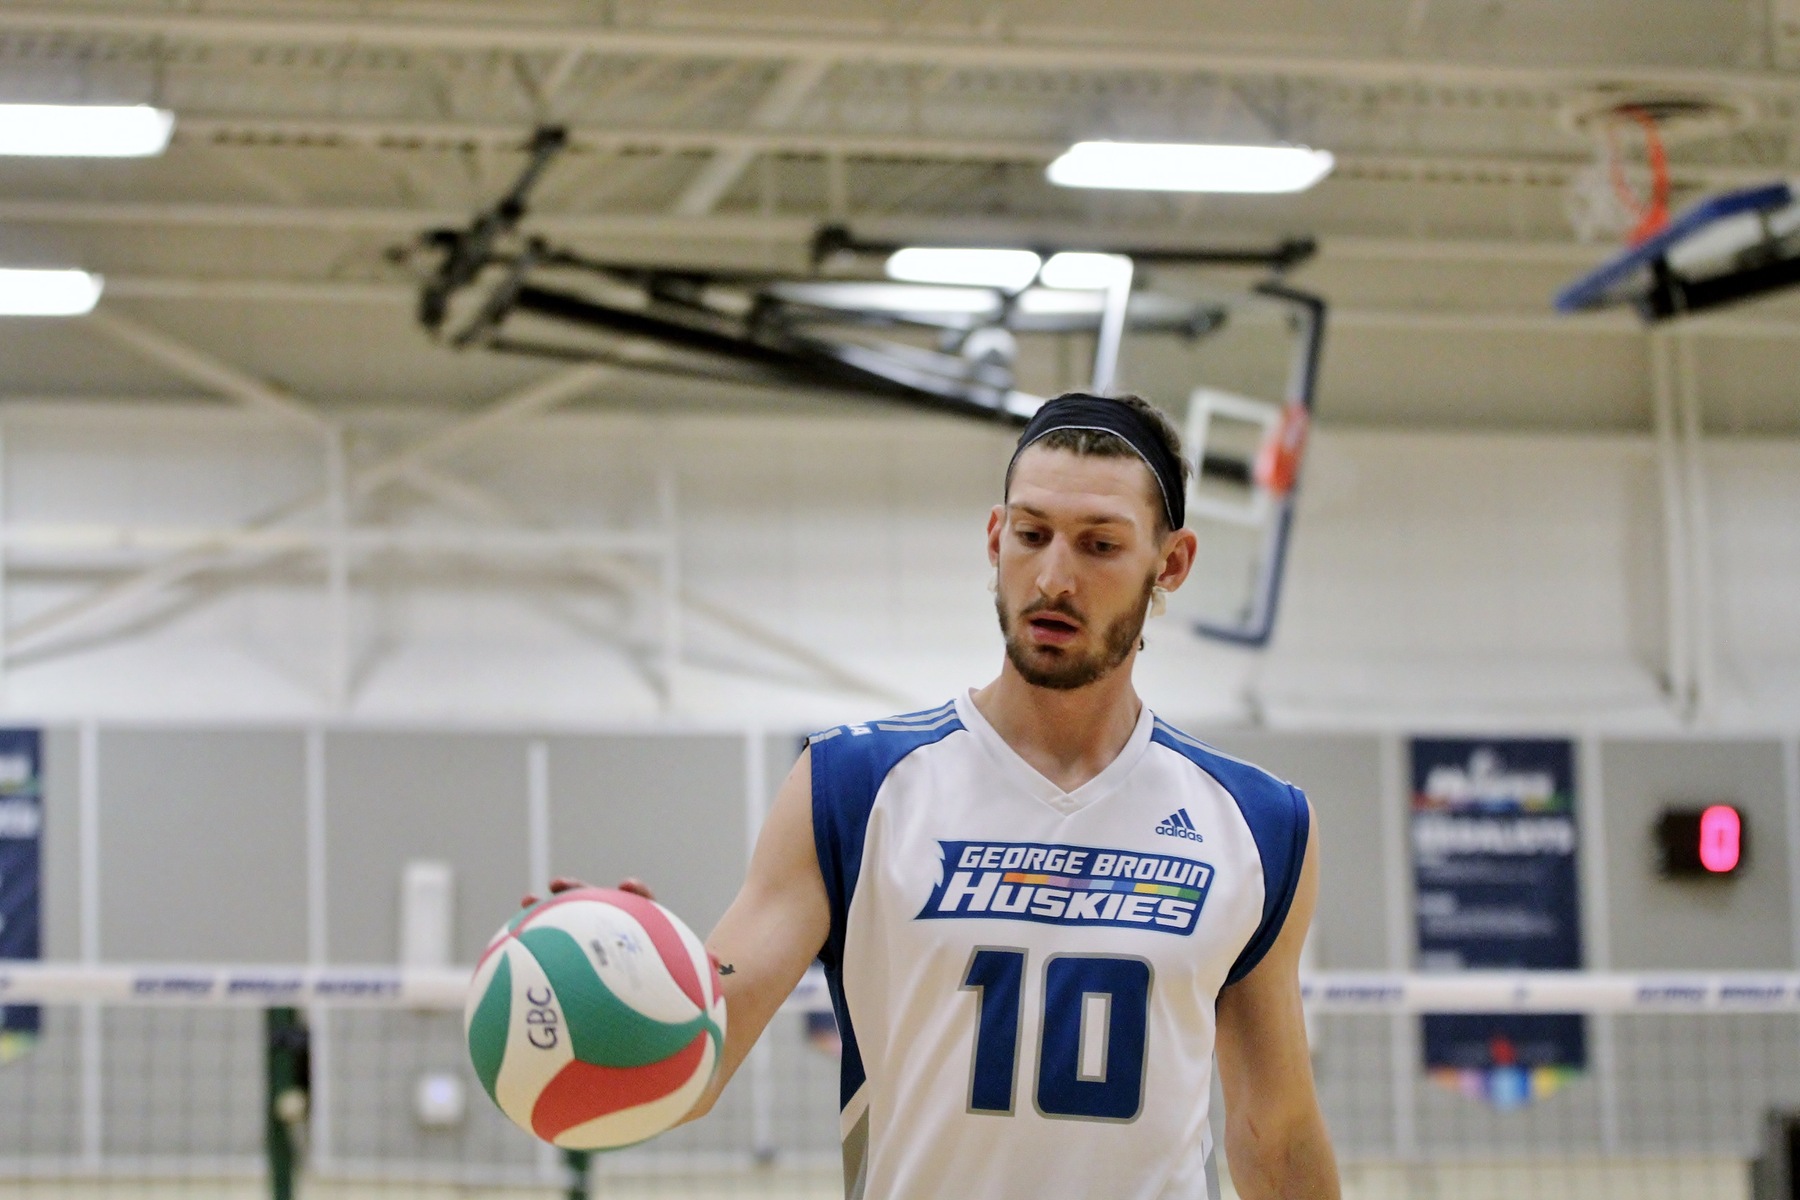 Men's volleyball player with ball in hand